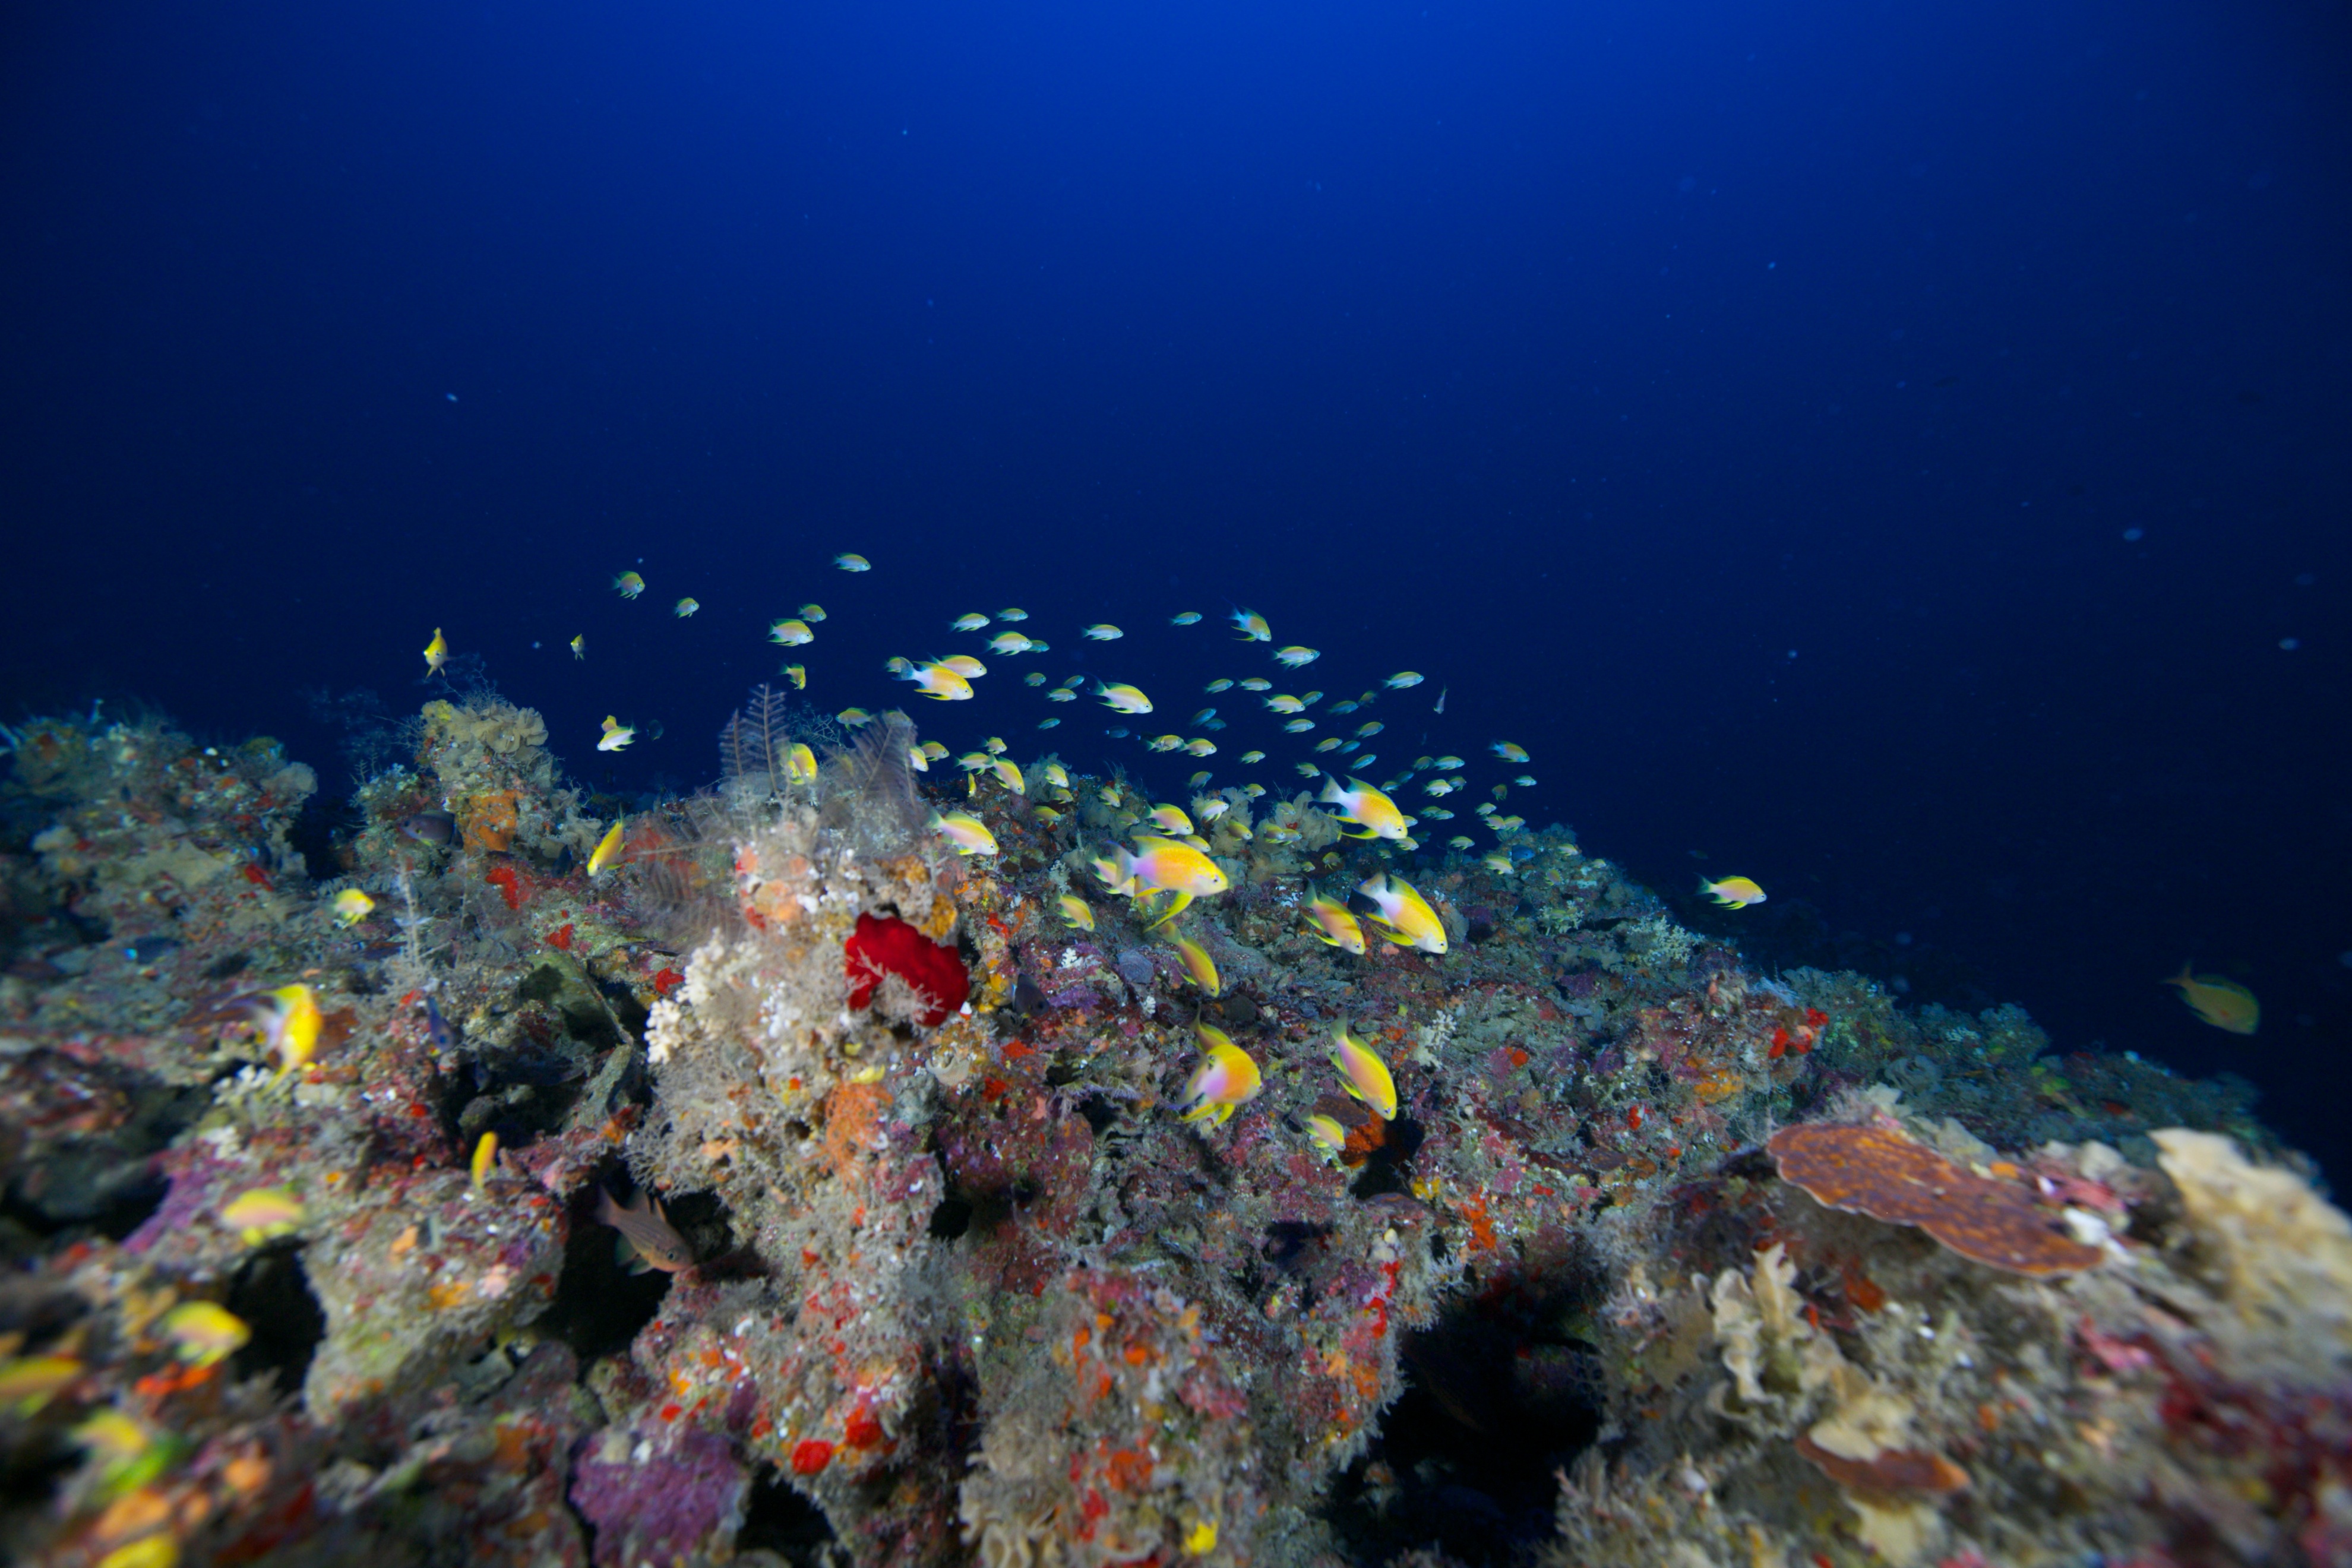 Fish congregating on deep benthic coral reef habitat in the waters of the West Hawai'i Habitat Focus Area.